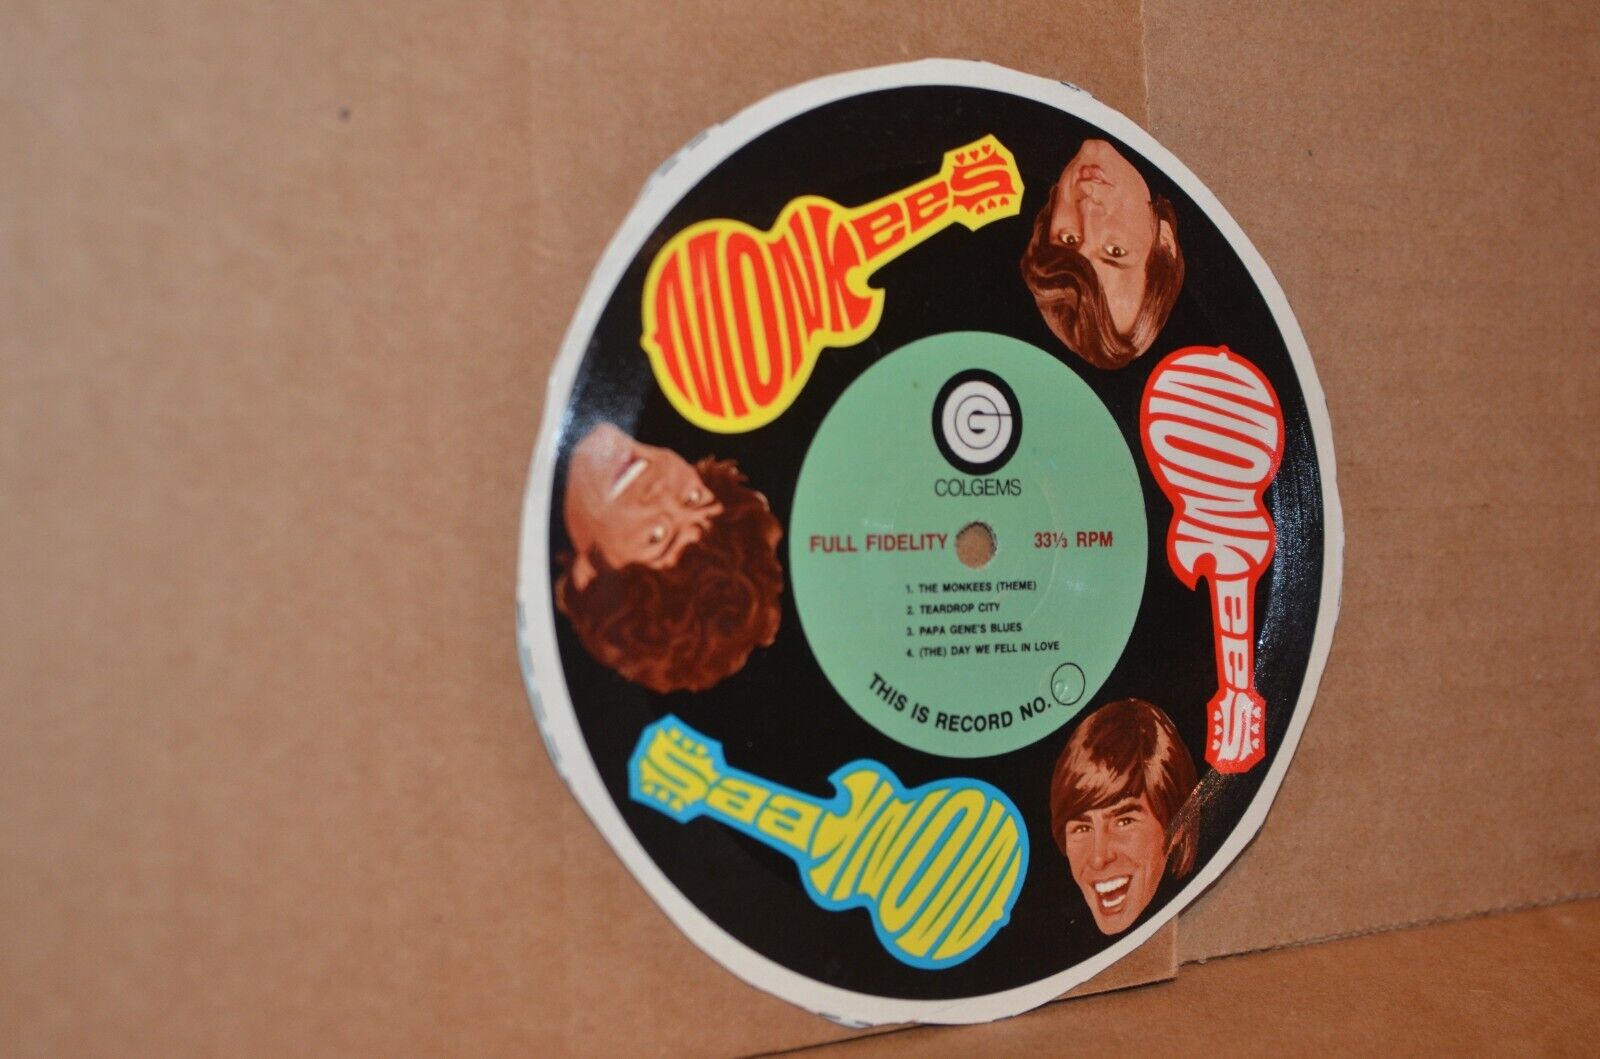 THE MONKEES; RARE CEREAL BOX CARDBOARD 33 1/3 RPM RECORD